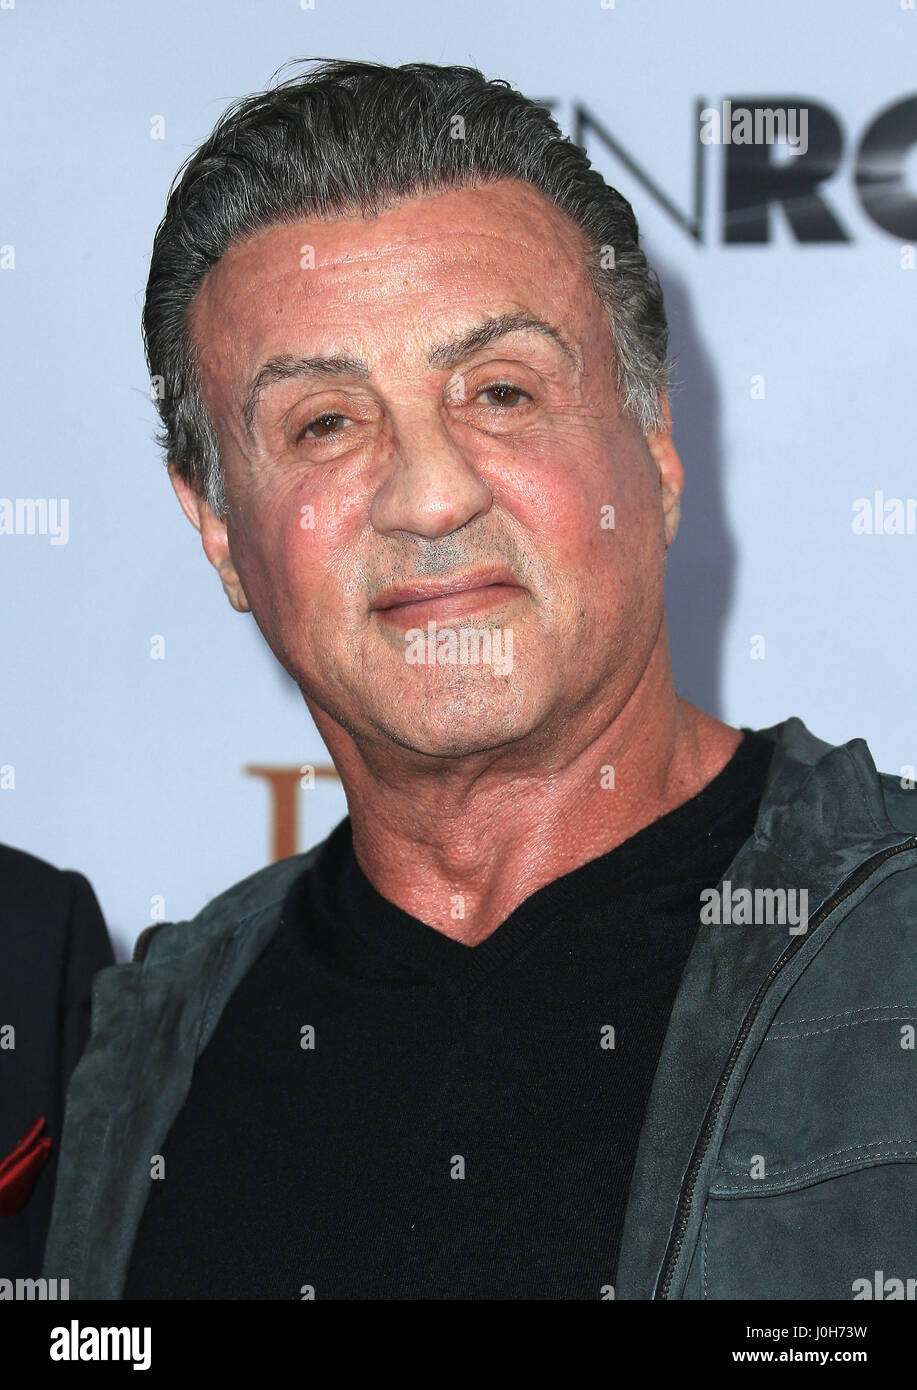 Hollywood, California, USA. 12th Apr, 2017. Sylvester Stallone. Premiere Of Open Road Films' ''The Promise'' held at TCL Chinese Theatre. Photo Credit: AdMedia (Credit Image: © AdMedia via ZUMA Wire) Credit: ZUMA Press, Inc./Alamy Live News Stock Photo